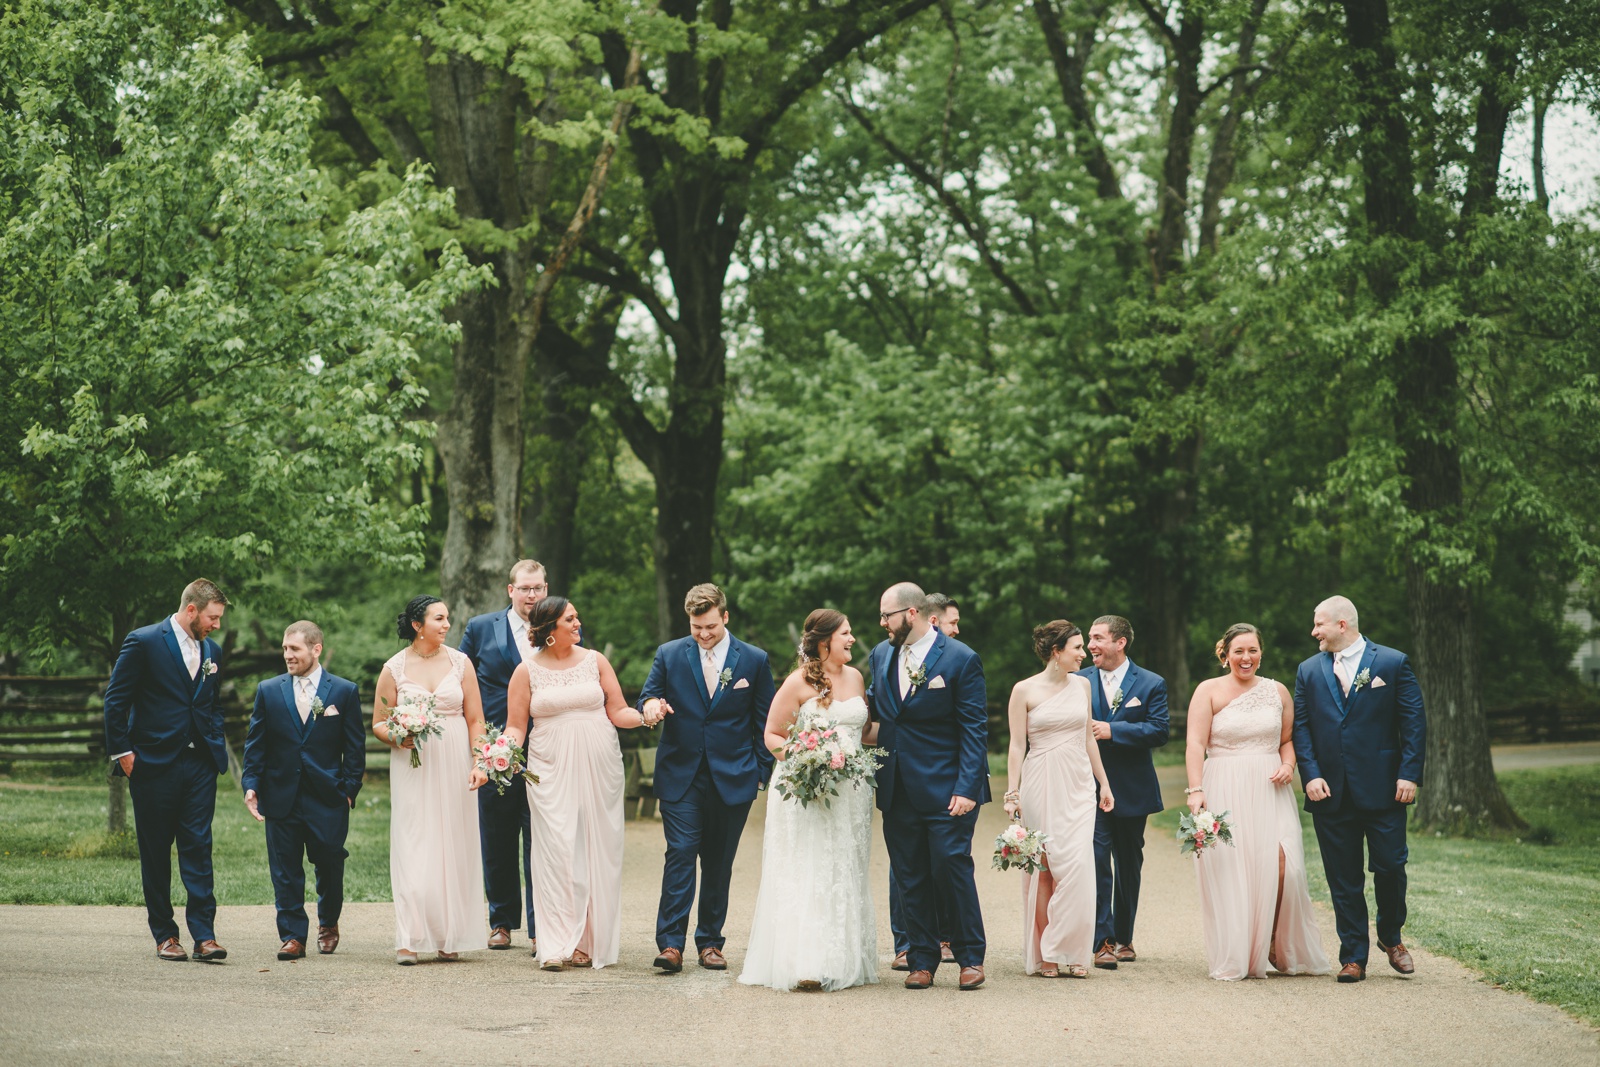 Andrea & Bryan | Petersburg, IL Navy and Blush Whimsical Garden Party ...